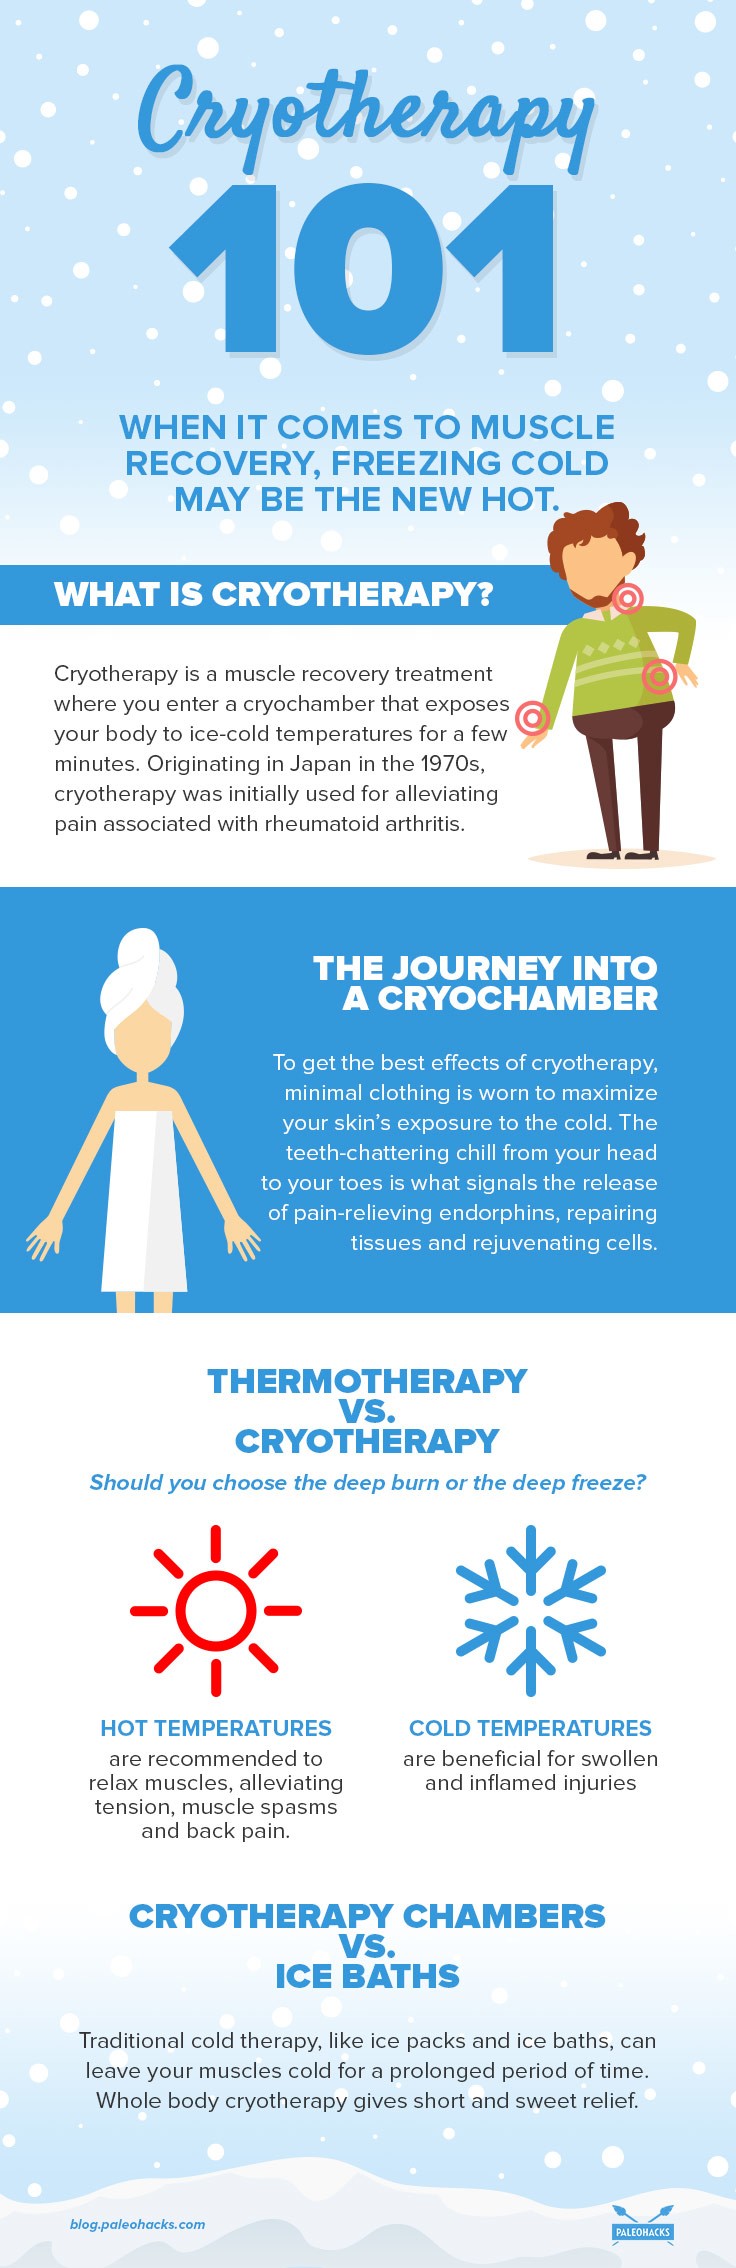 what is Cryotherapy